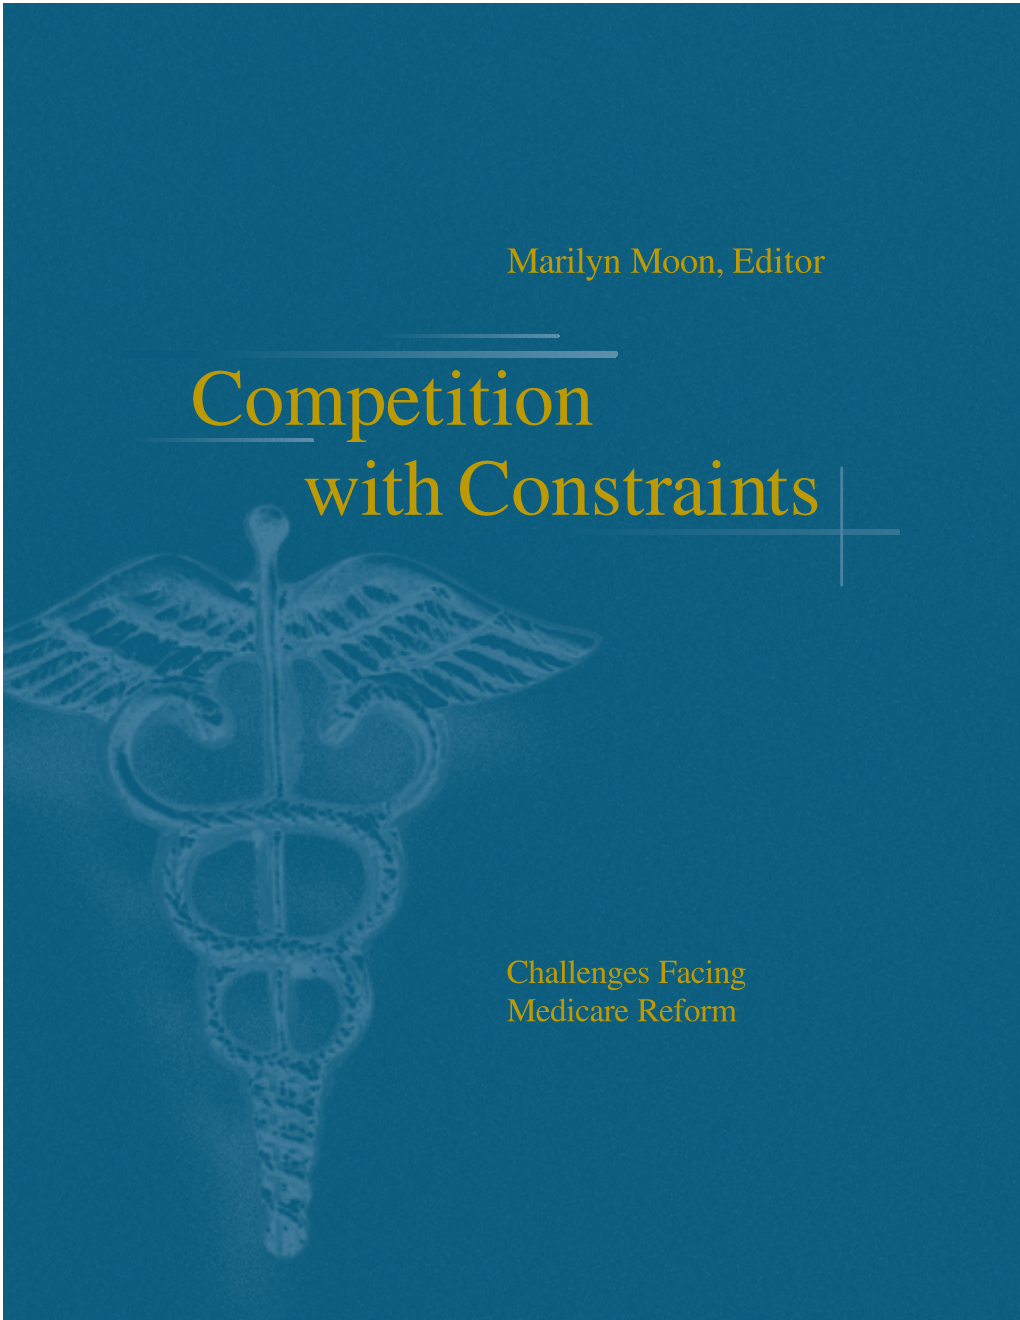 Competition with Constraints: Challenges Facing Medicare Reform